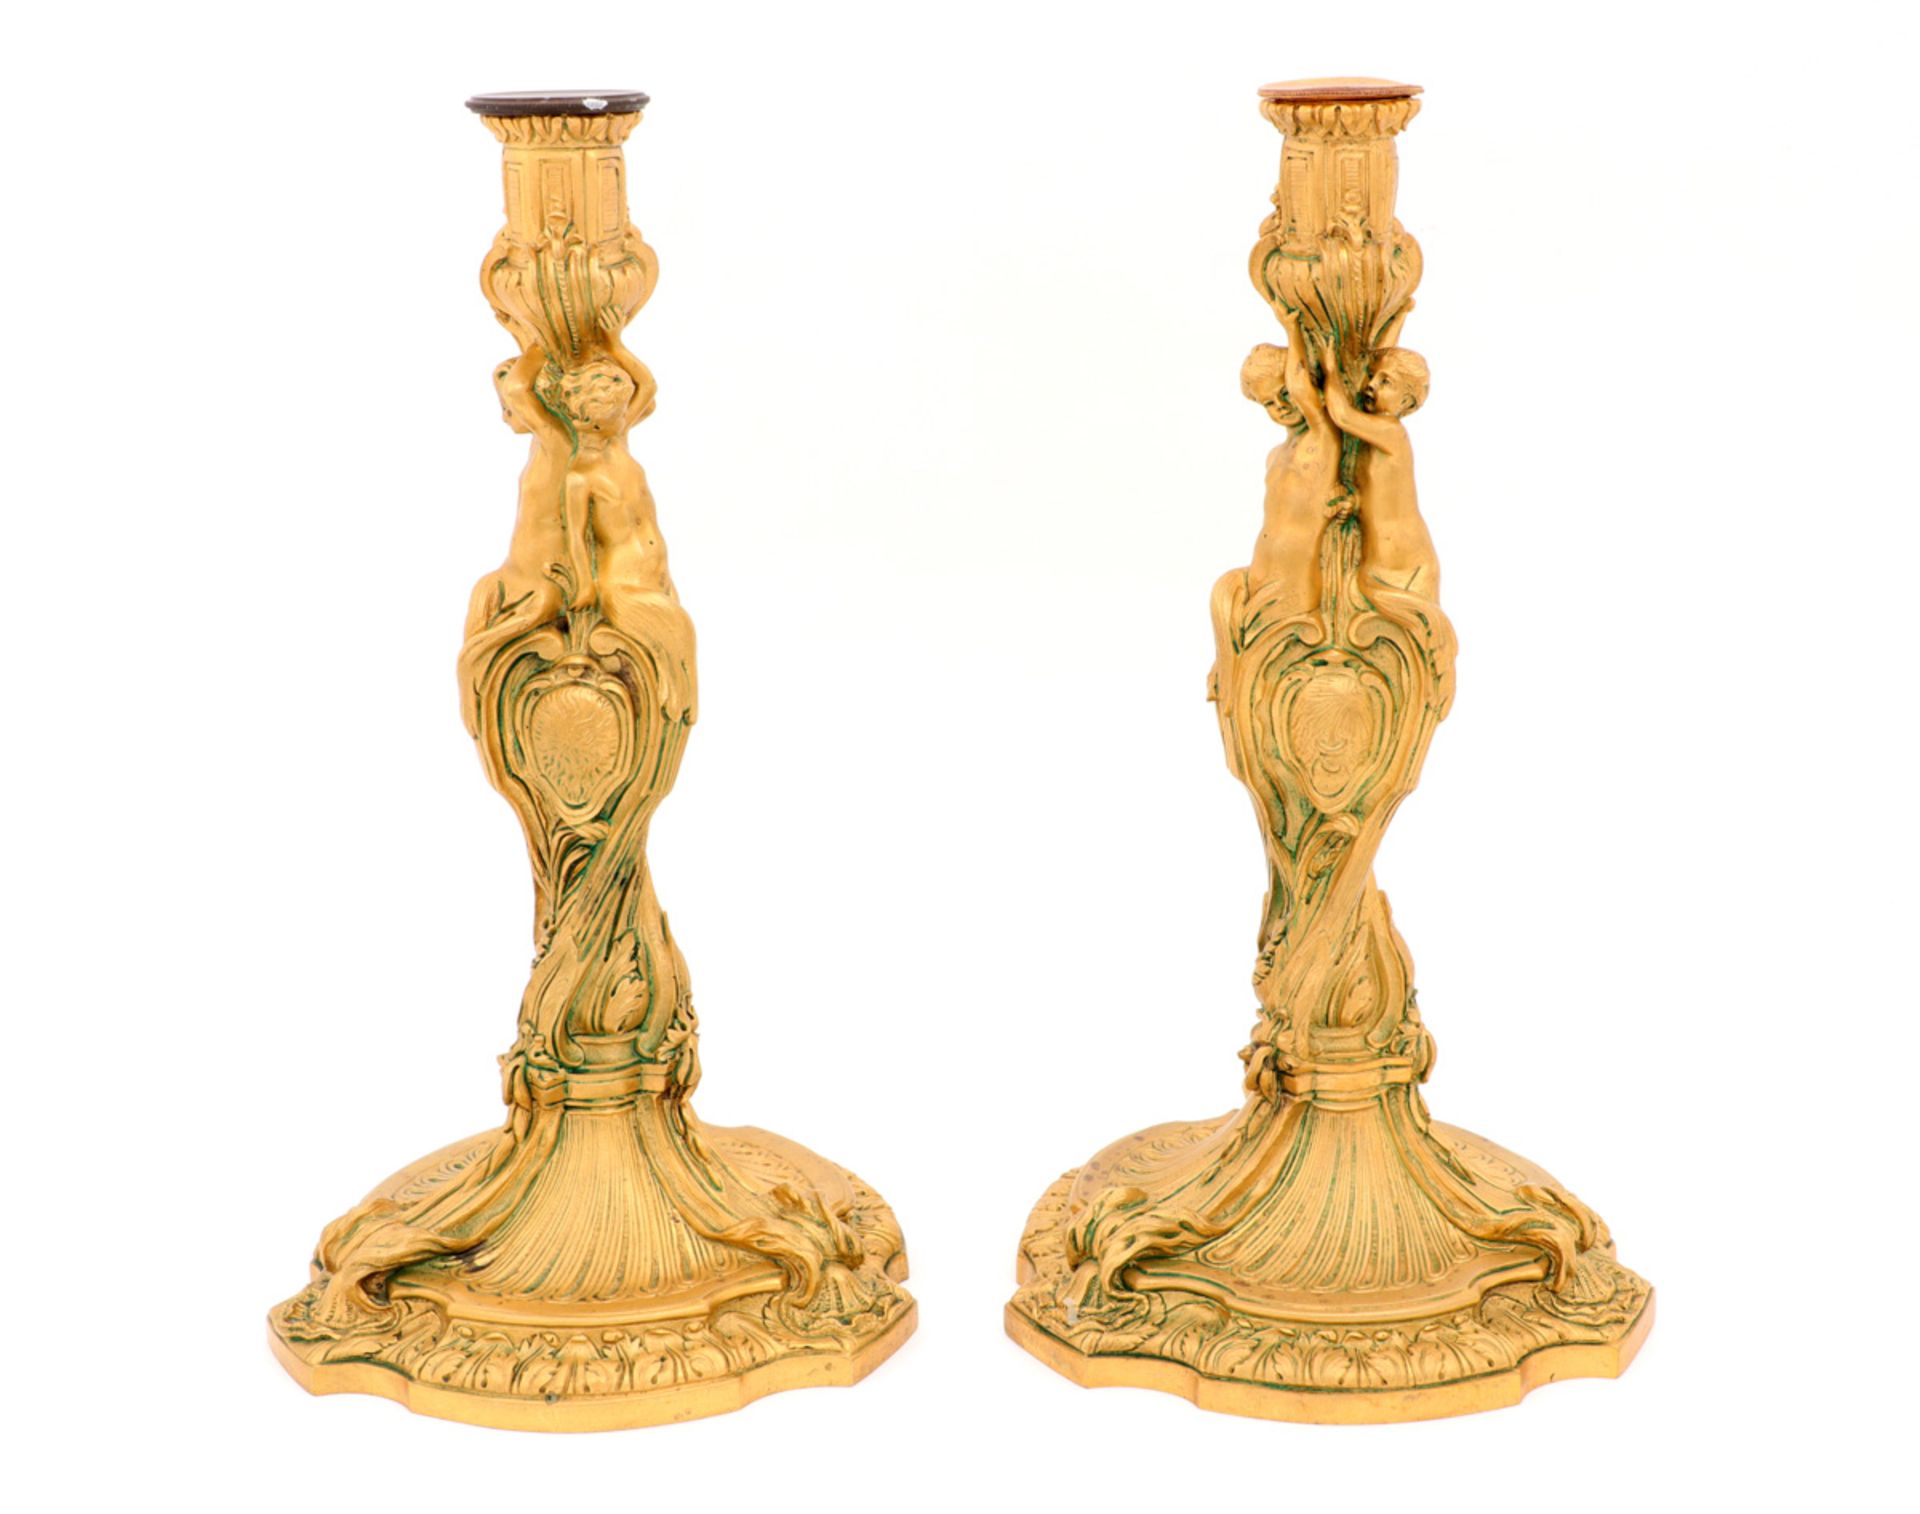 A PAIR OF LOUIS XV STYLE CANDLESTICKS Gilt bronze, profusely chiselled deoration, with coat of